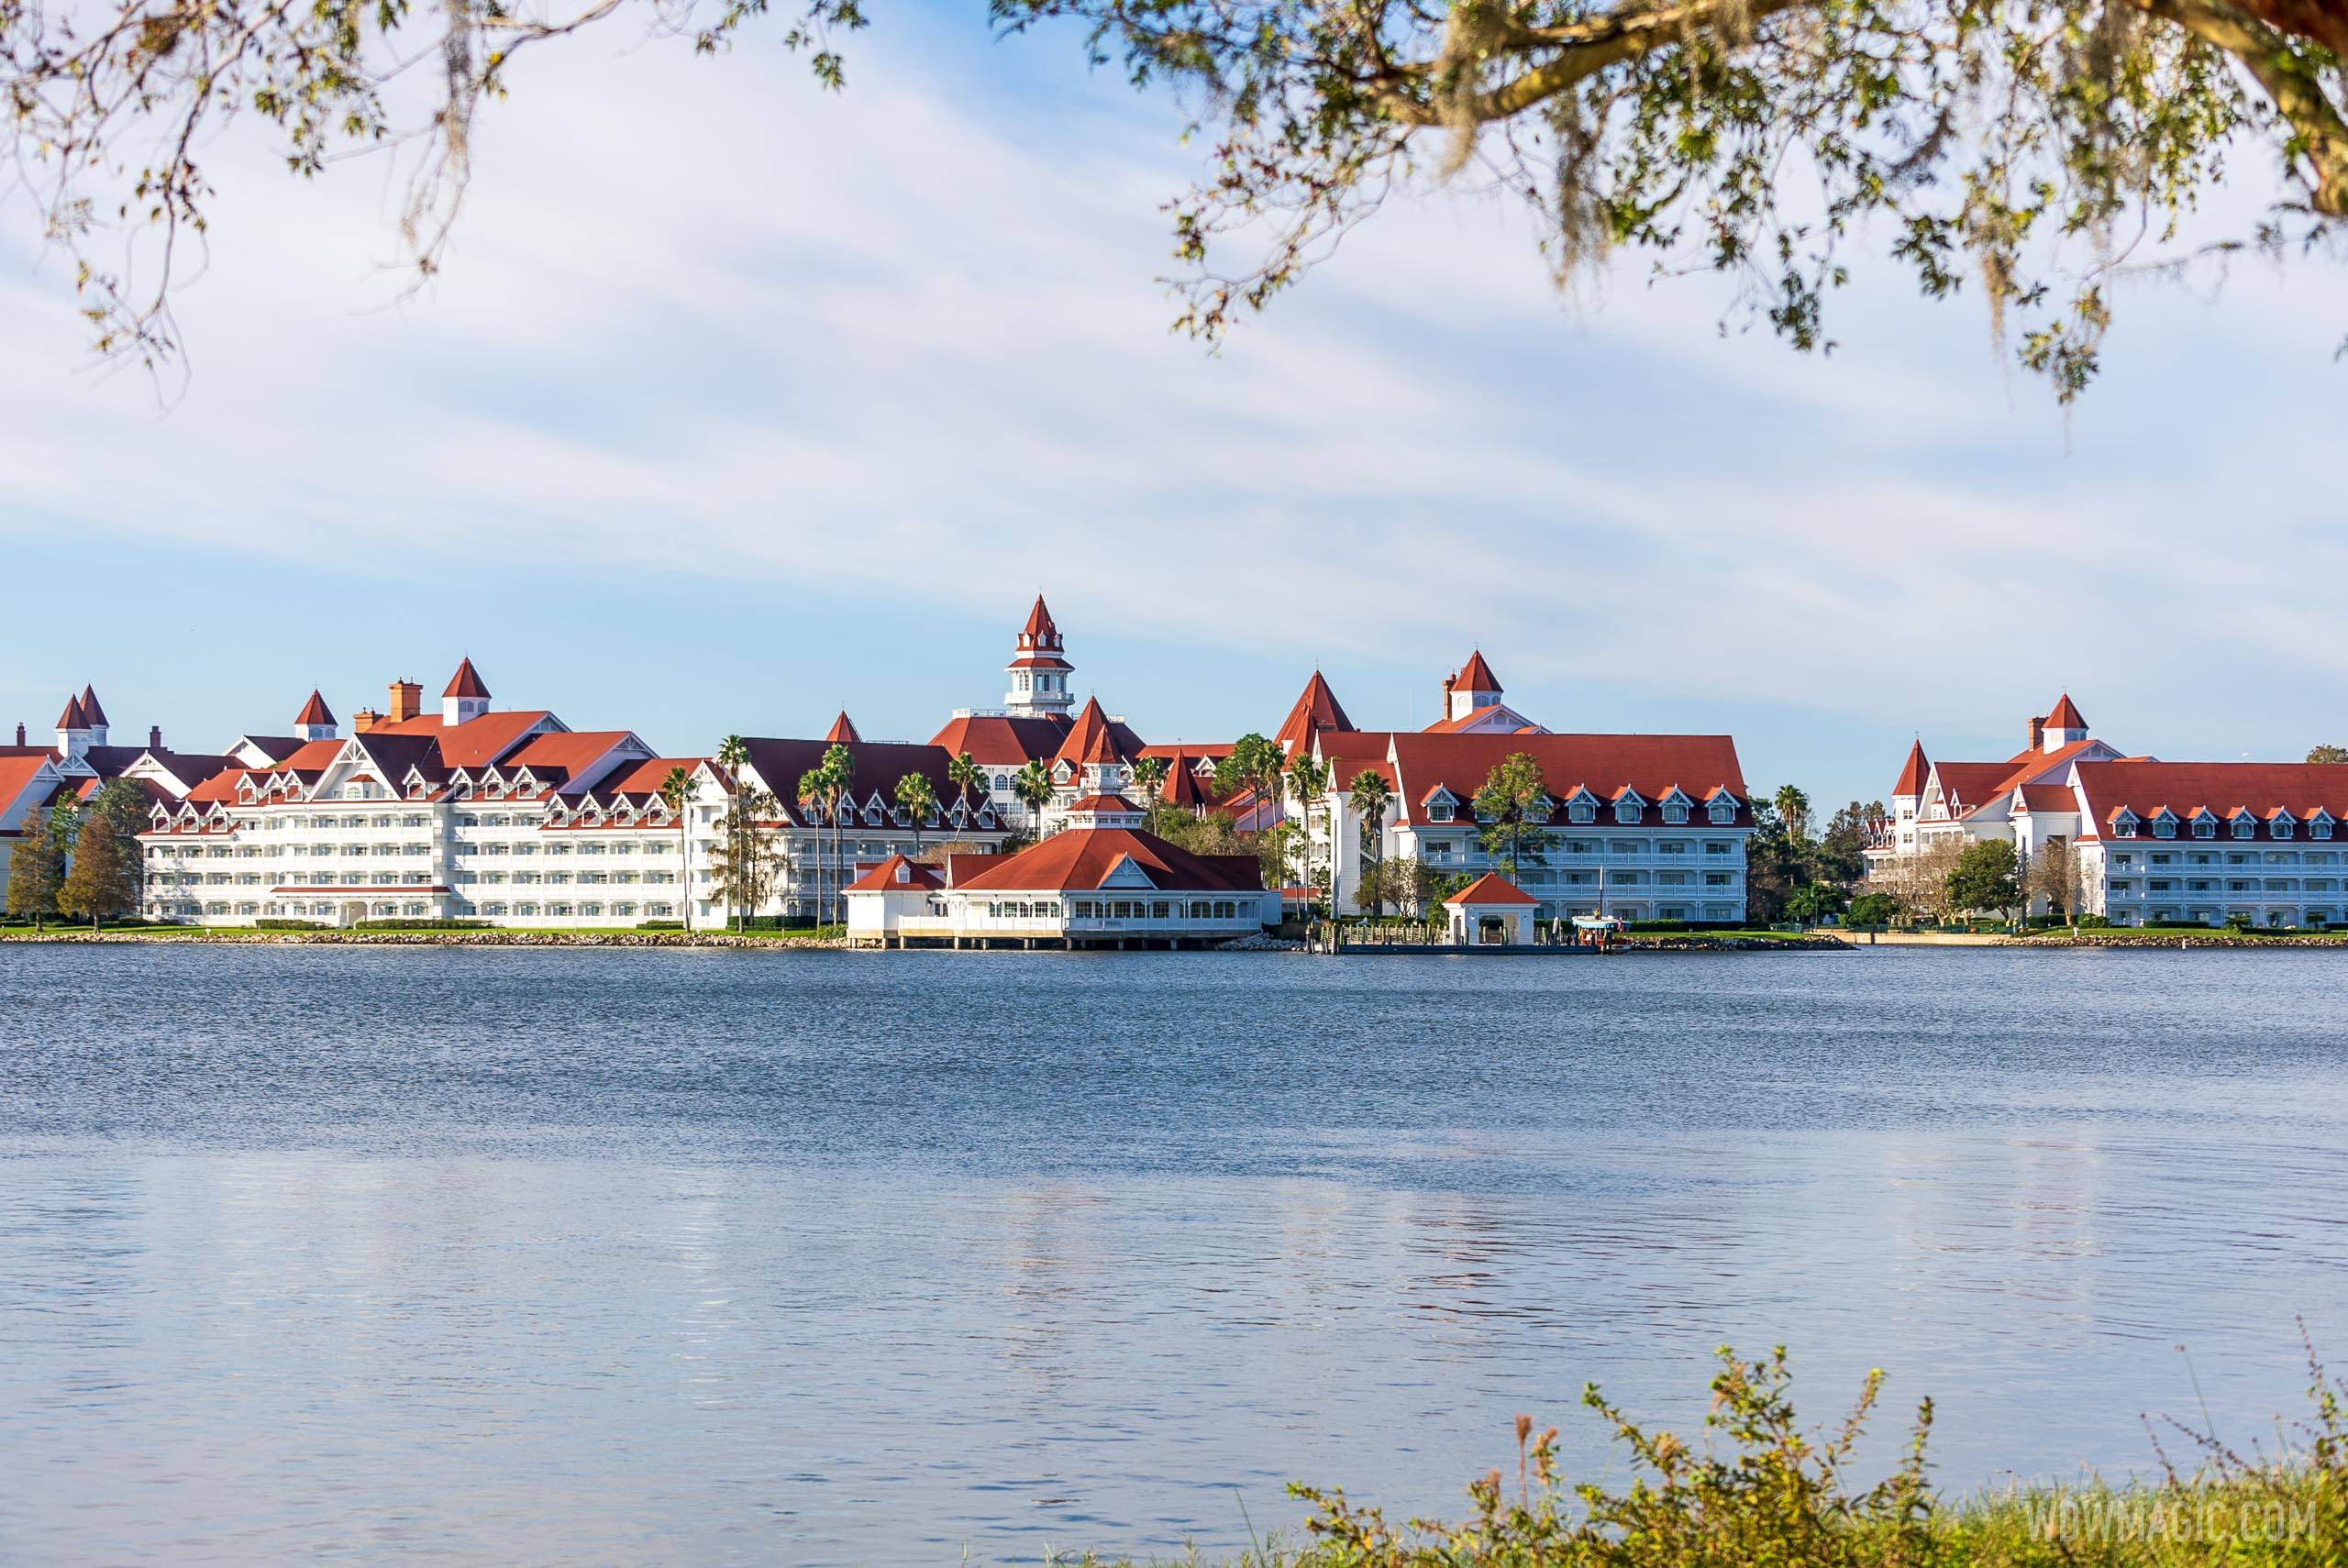 20% discount is available at Disney's Grand Floridian Resort